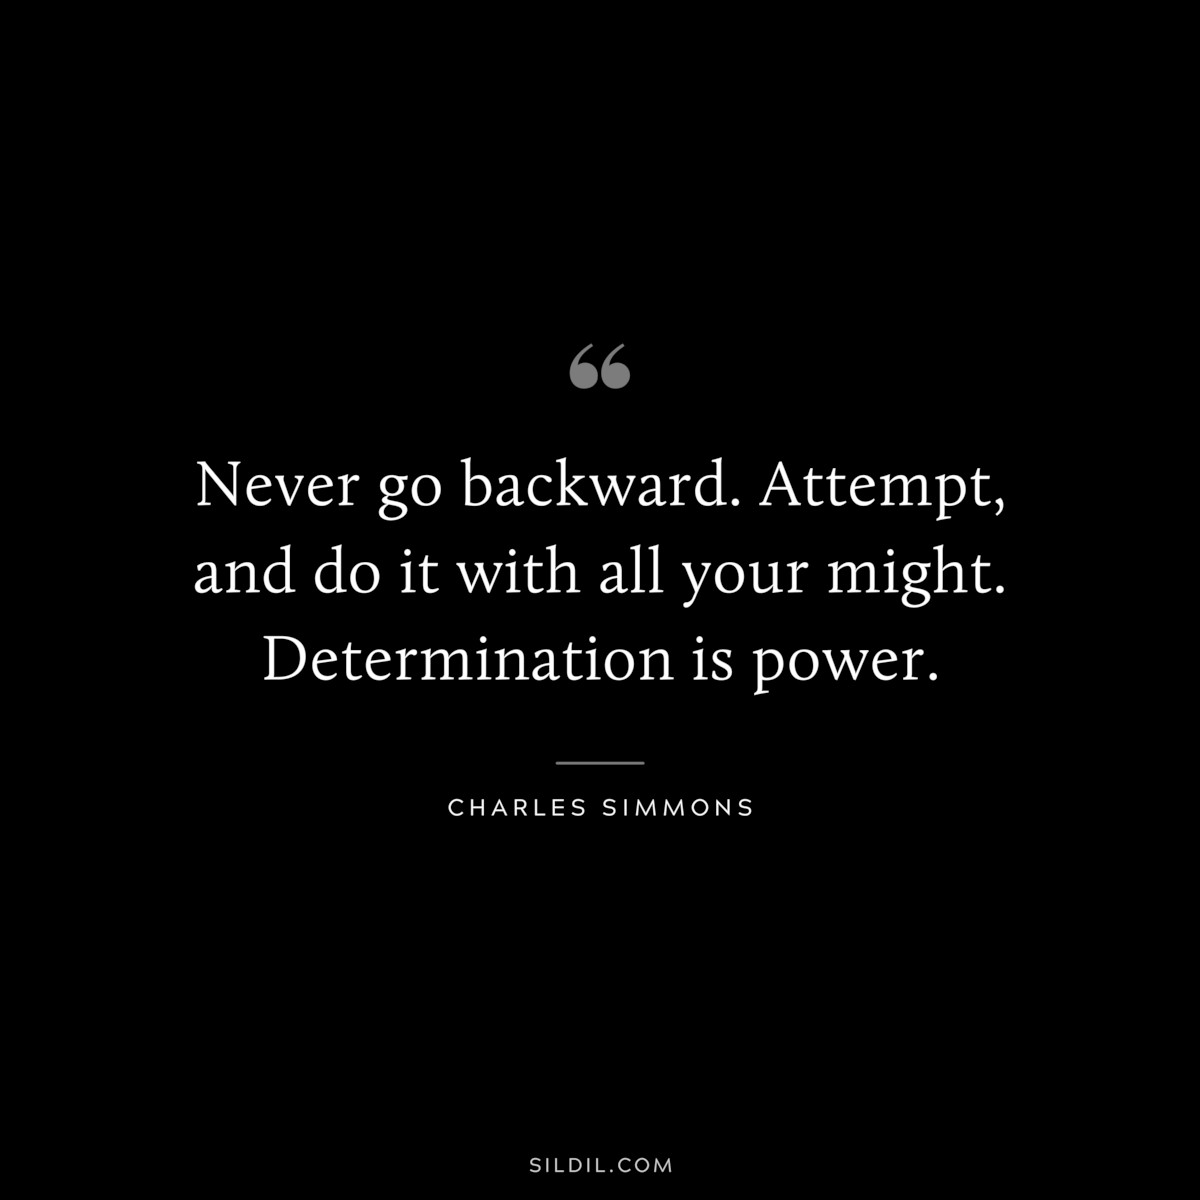 Never go backward. Attempt, and do it with all your might. Determination is power. ― Charles Simmons